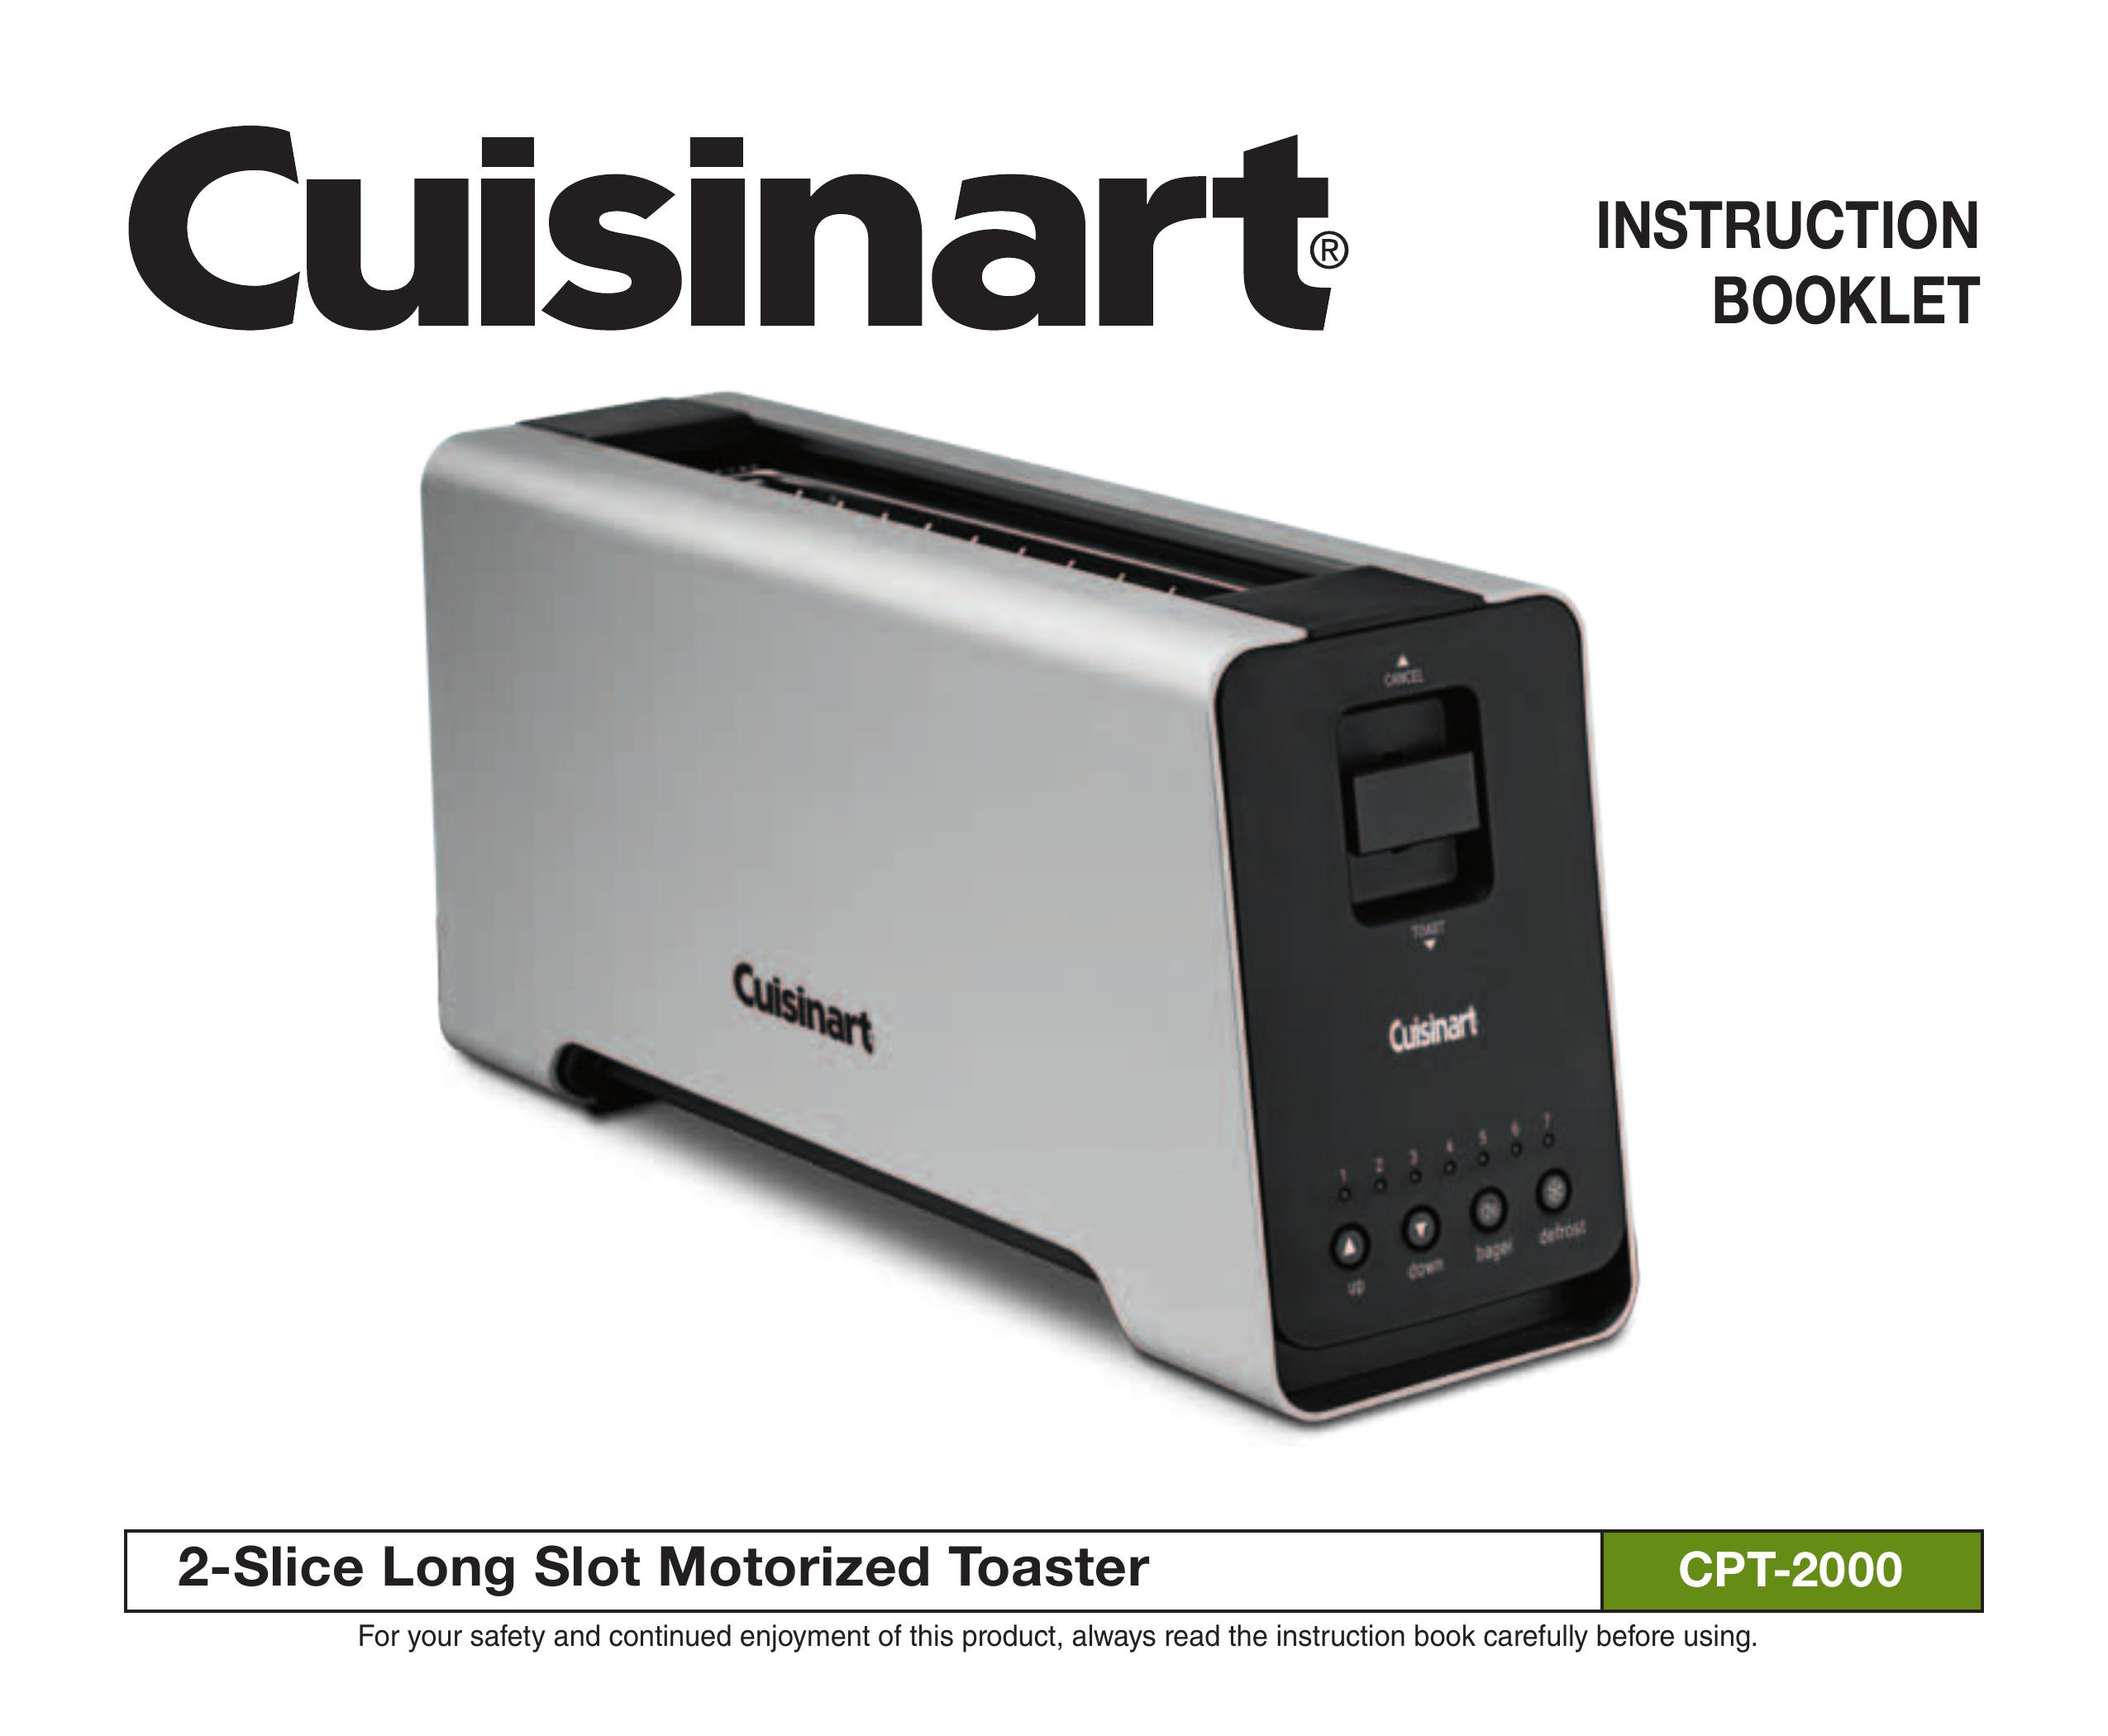 Cuisinart CPT-2000 Toaster User Manual